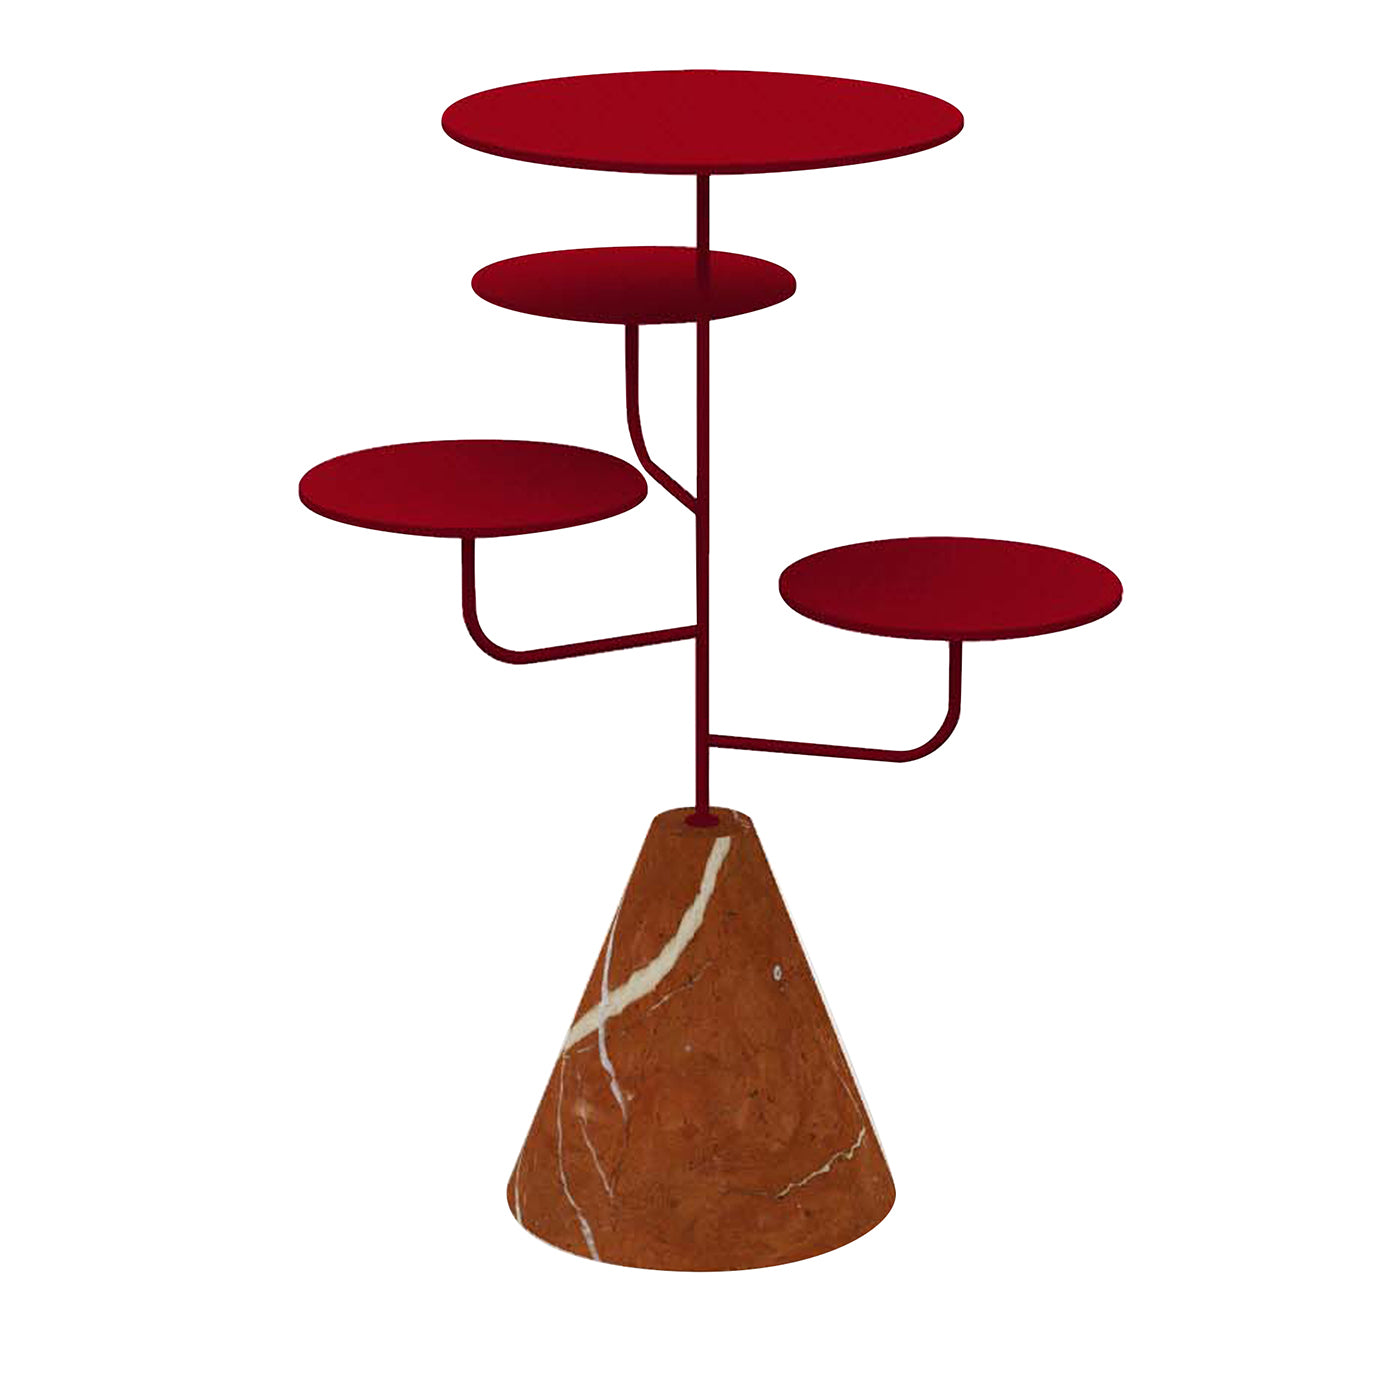 Condiviso 4-Tier Ruby Red/Red Alicante Serving Stand - Main view